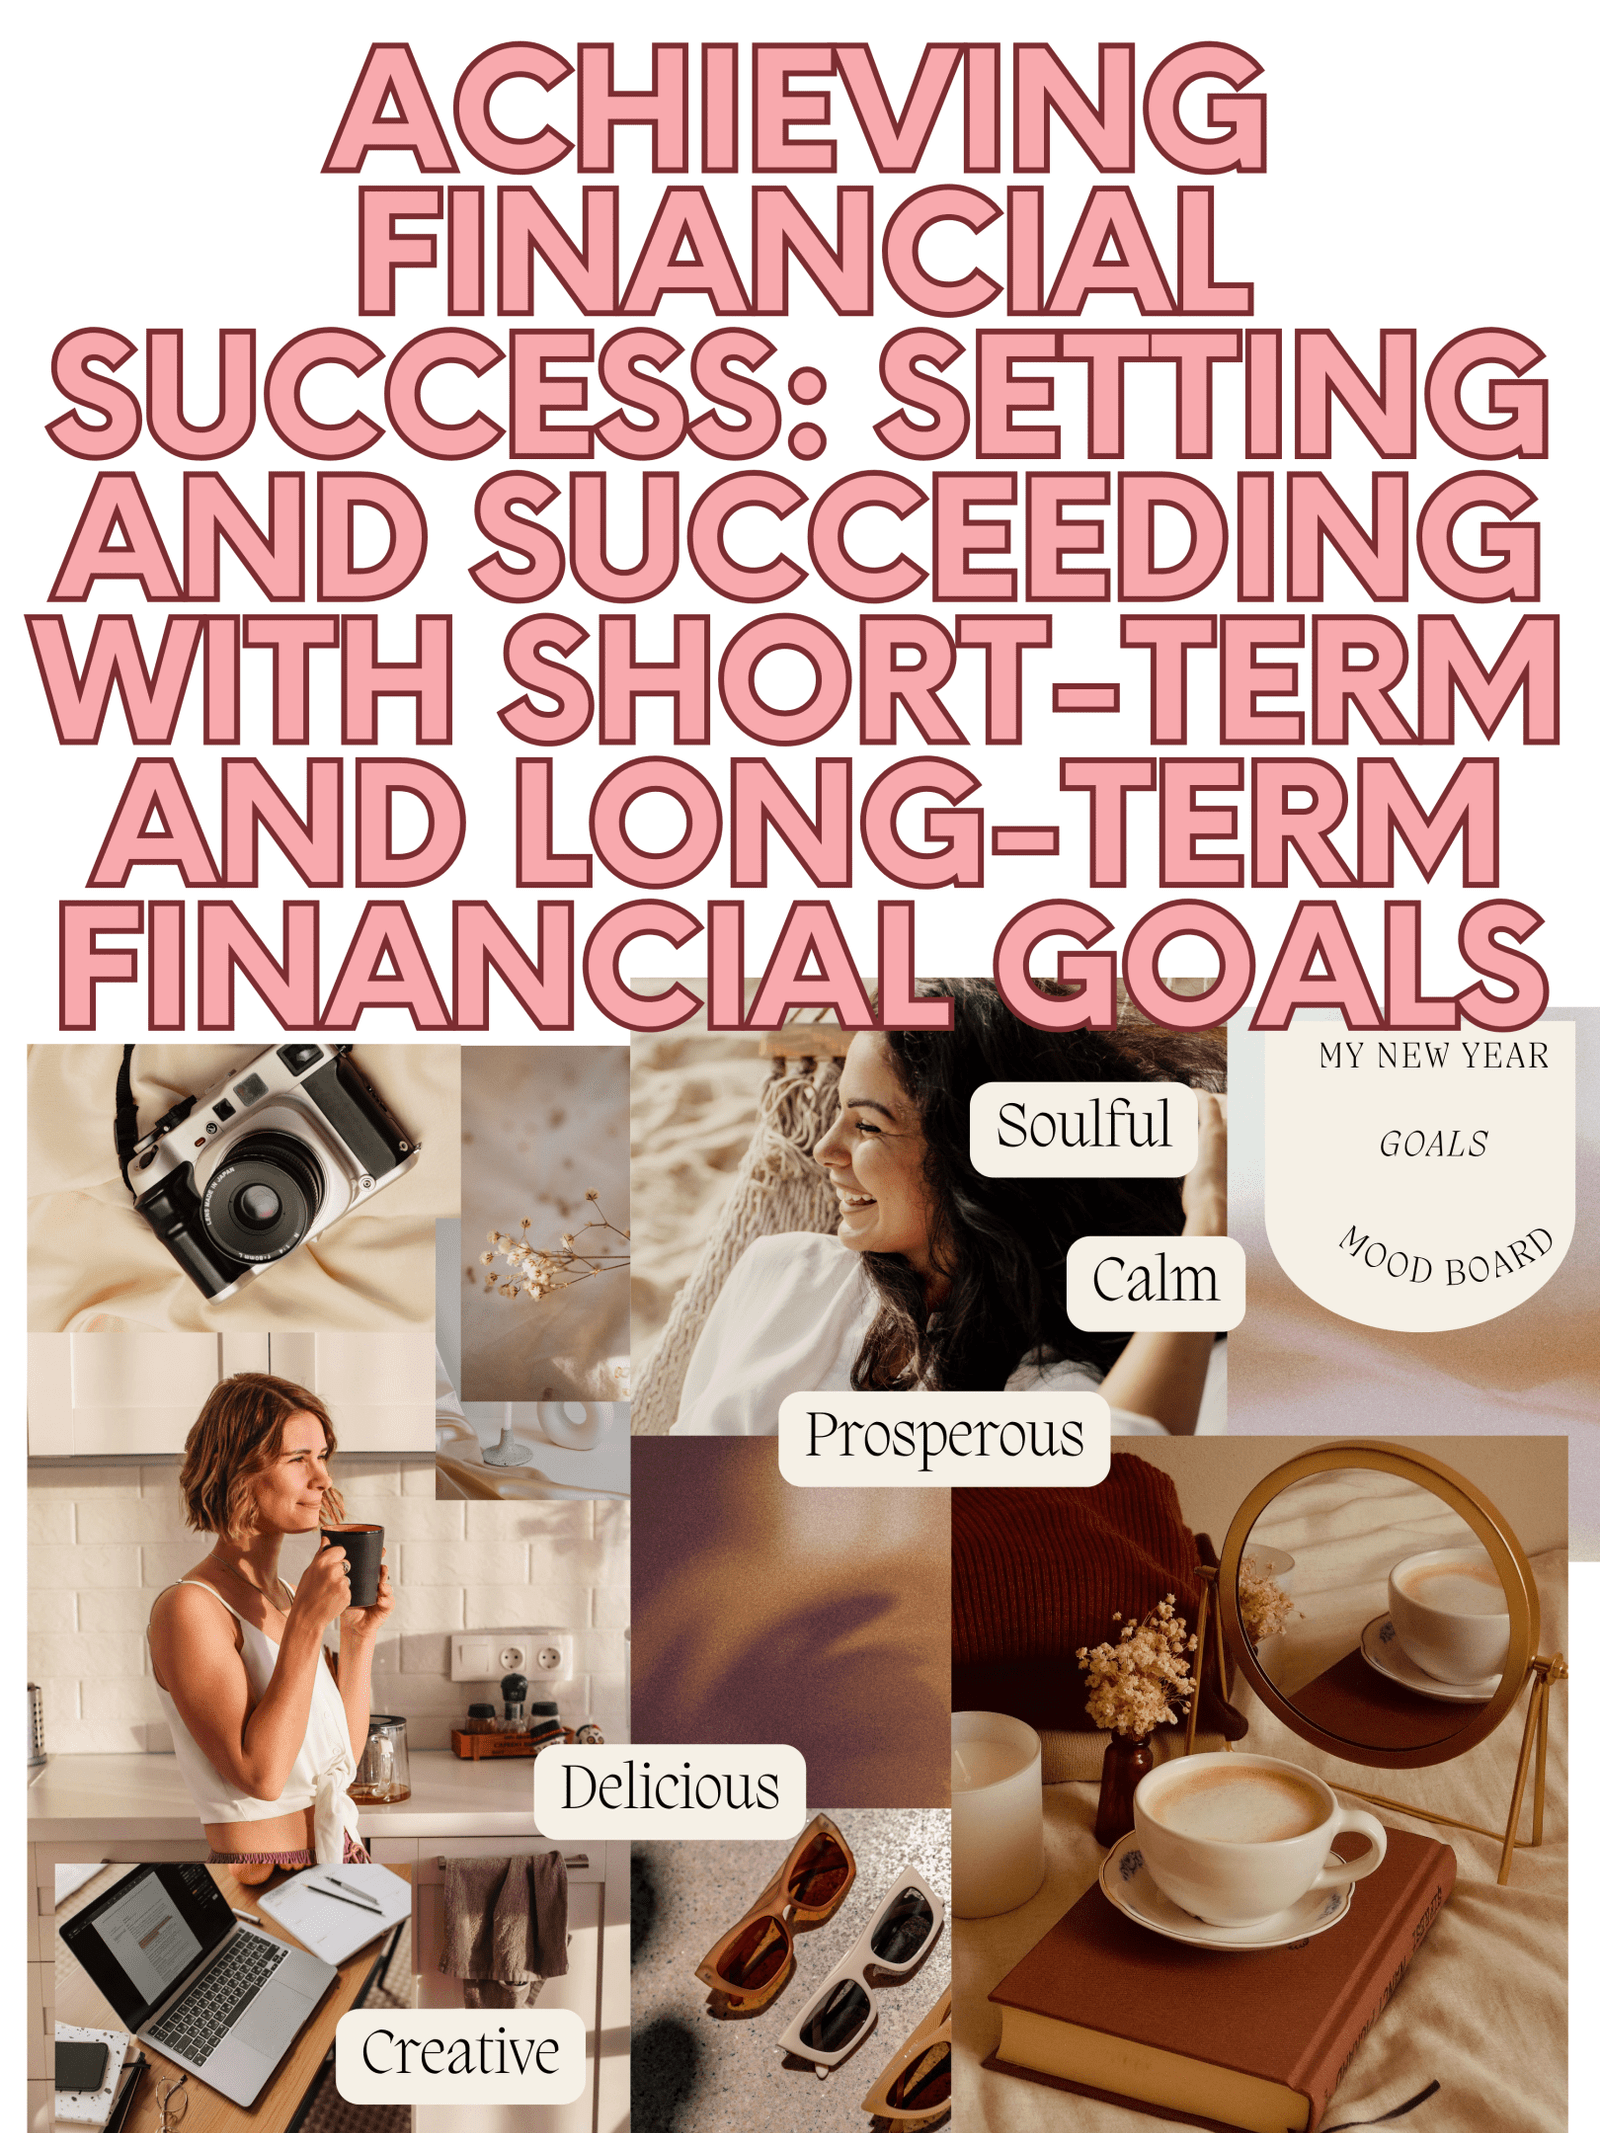 Achieving Financial Success: Setting and Succeeding with Short-Term and Long-Term Financial Goals